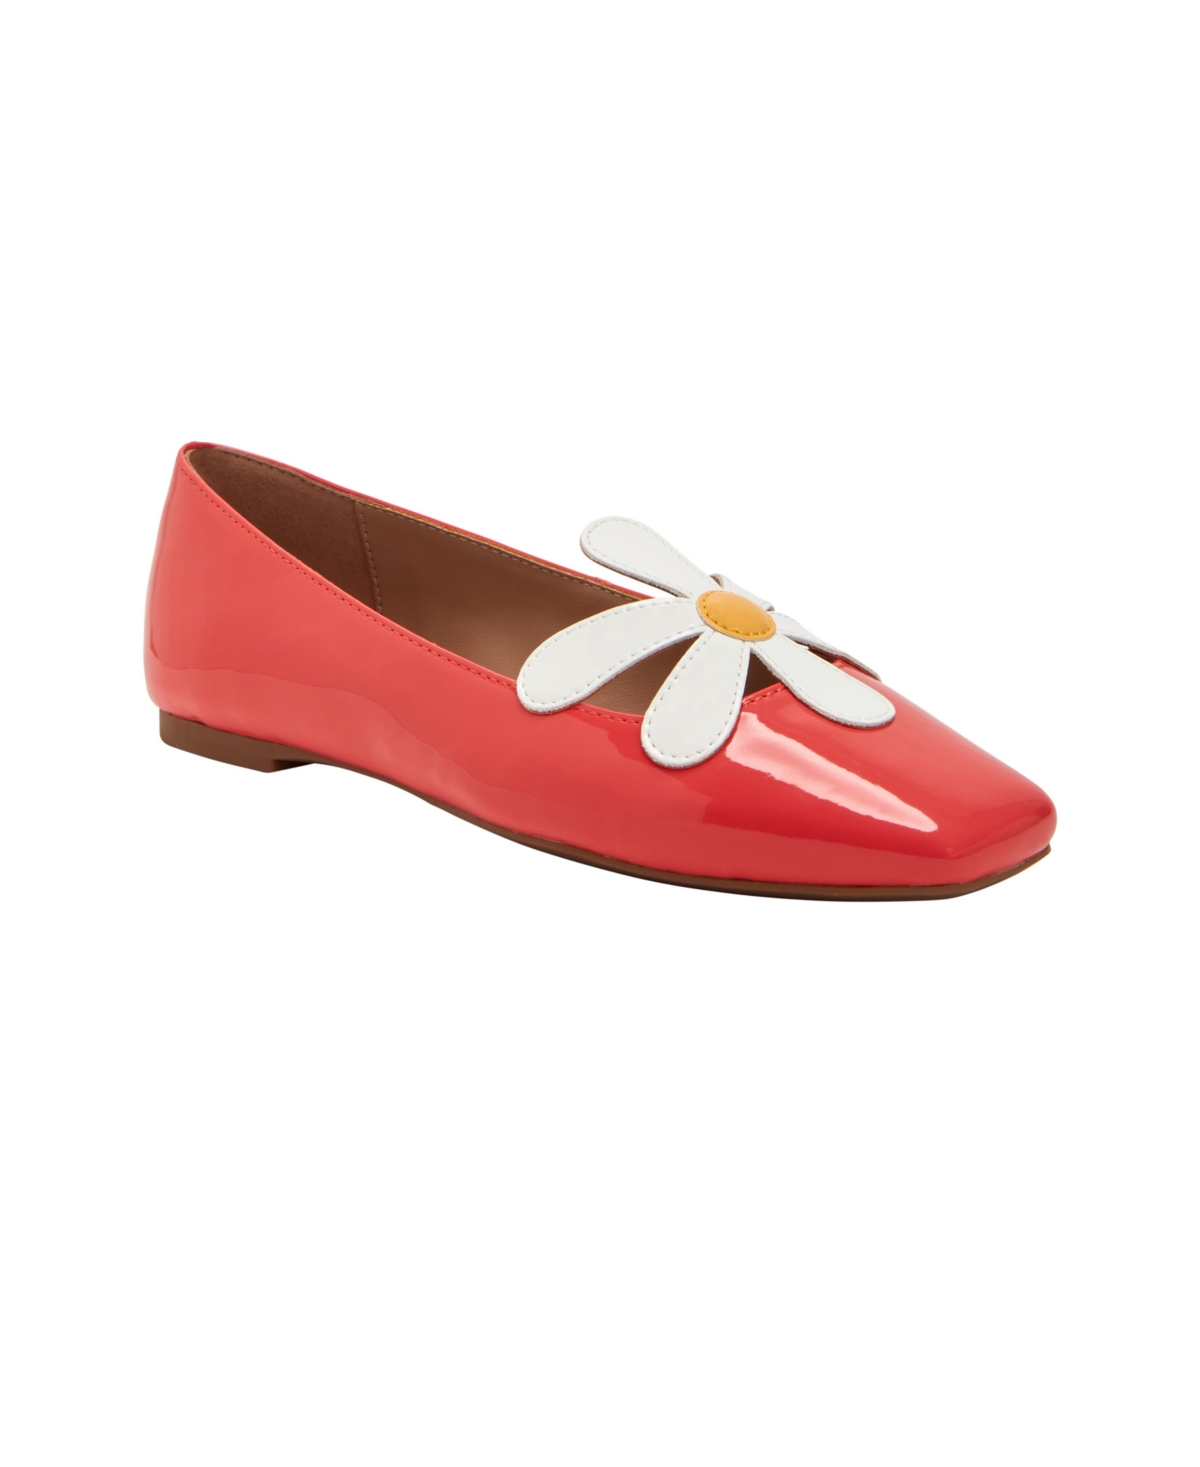 Shop Katy Perry Women's The Evie Daisy Slip-on Flats In Radiant Red